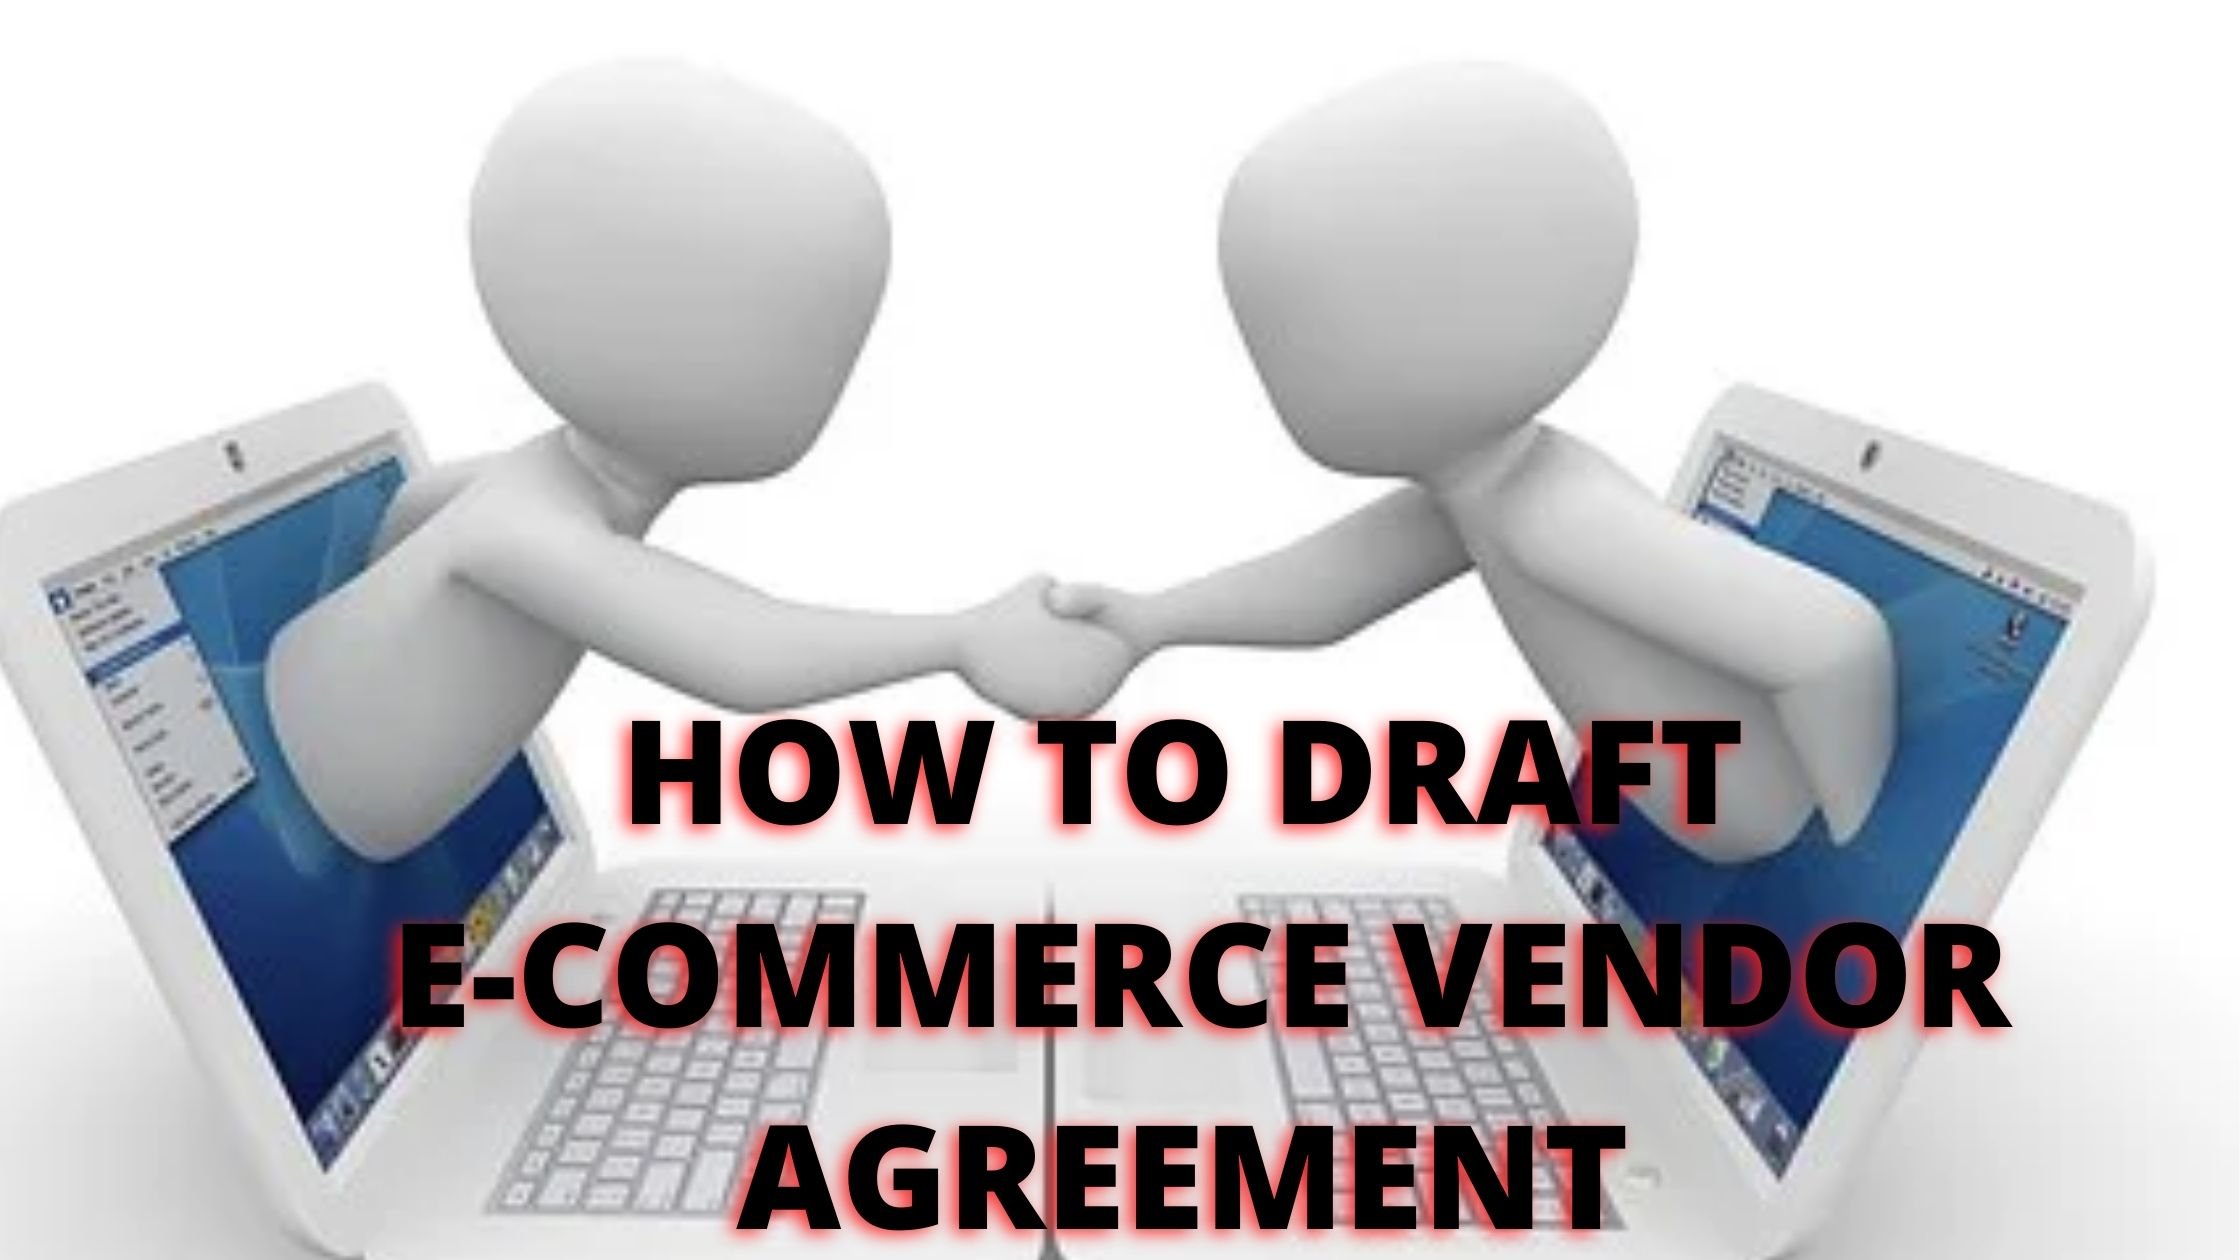 HOW TO DRAFT AN E-COMMERCE VENDOR AGREEMENT?